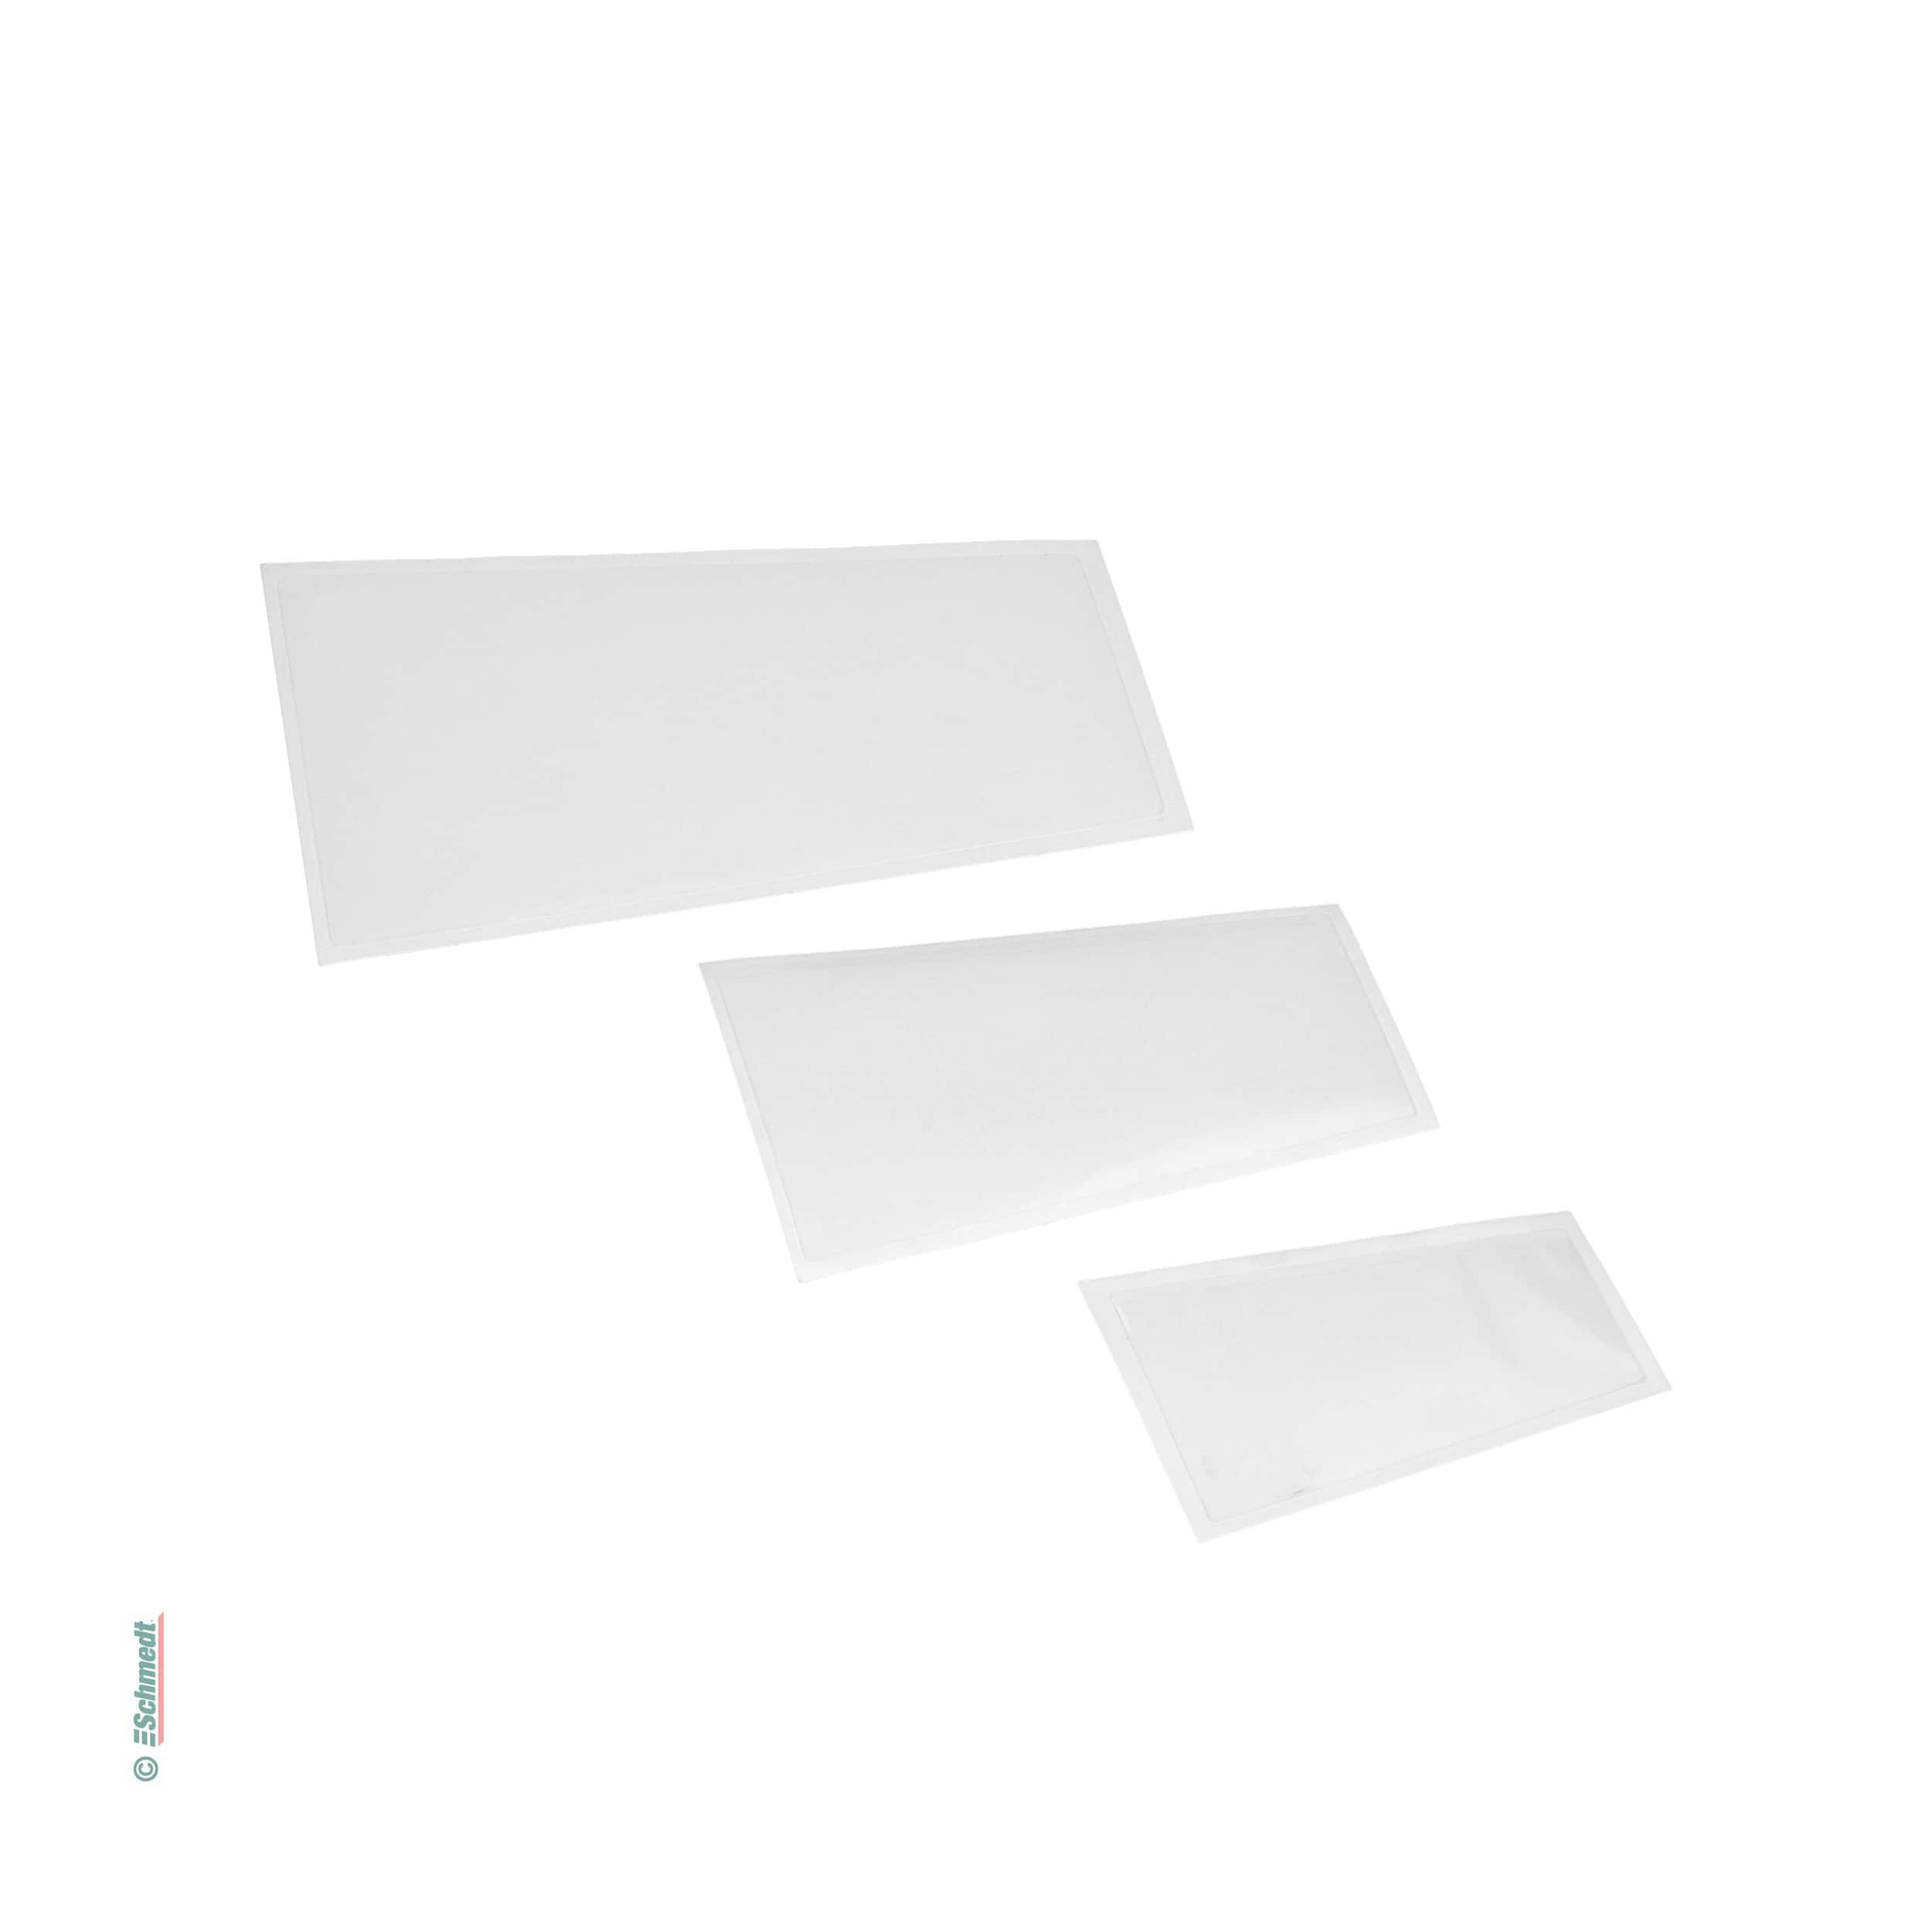 Clear Plastic Punched Pocket For Ring Binder Folder A5/A4, 4 Thickness  Pack0.04 mm / A4